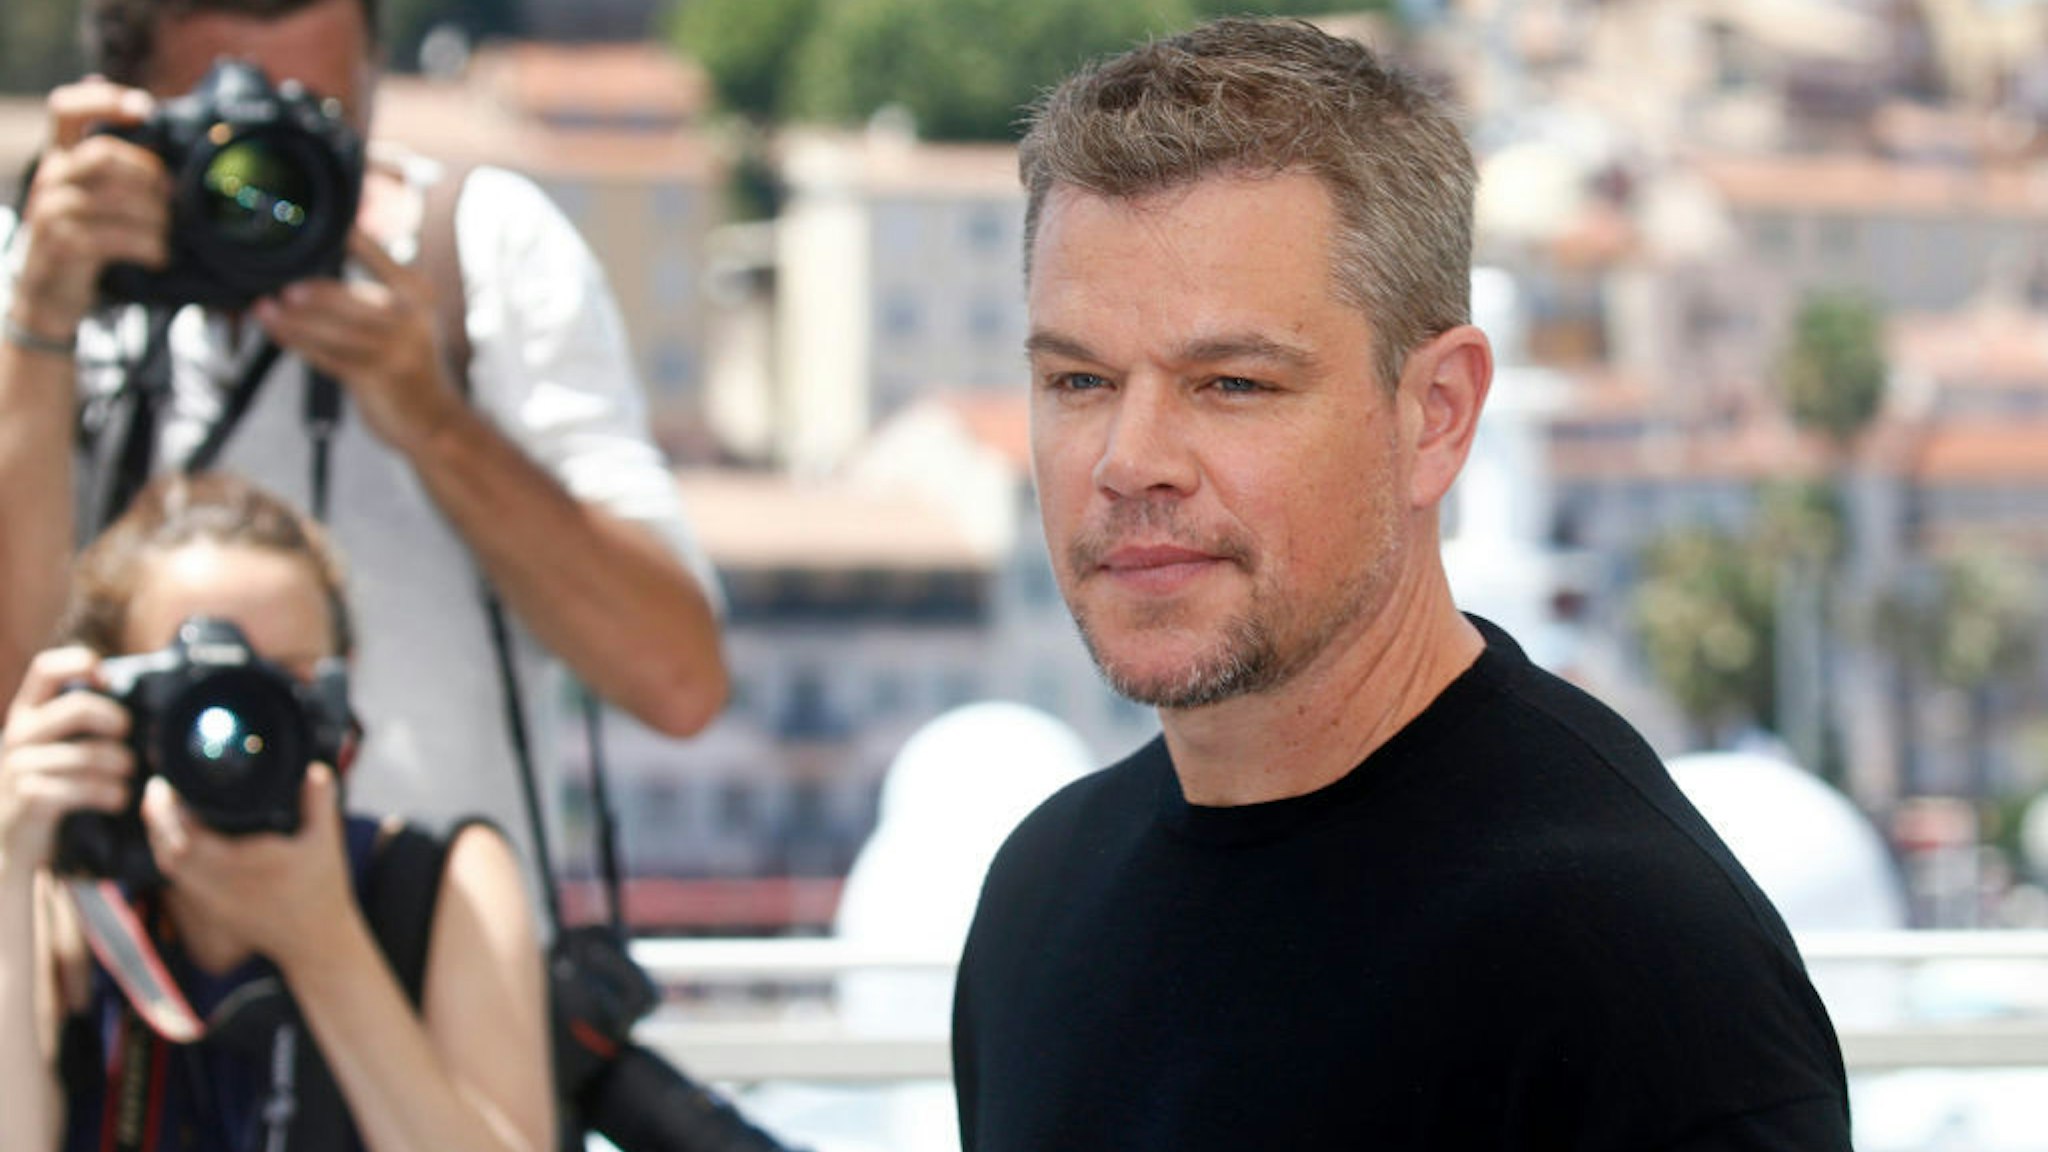 Matt Damon poses at the photocall of 'Stillwater' during the 74th Cannes Film Festival at the Palais des Festivals in Cannes, France